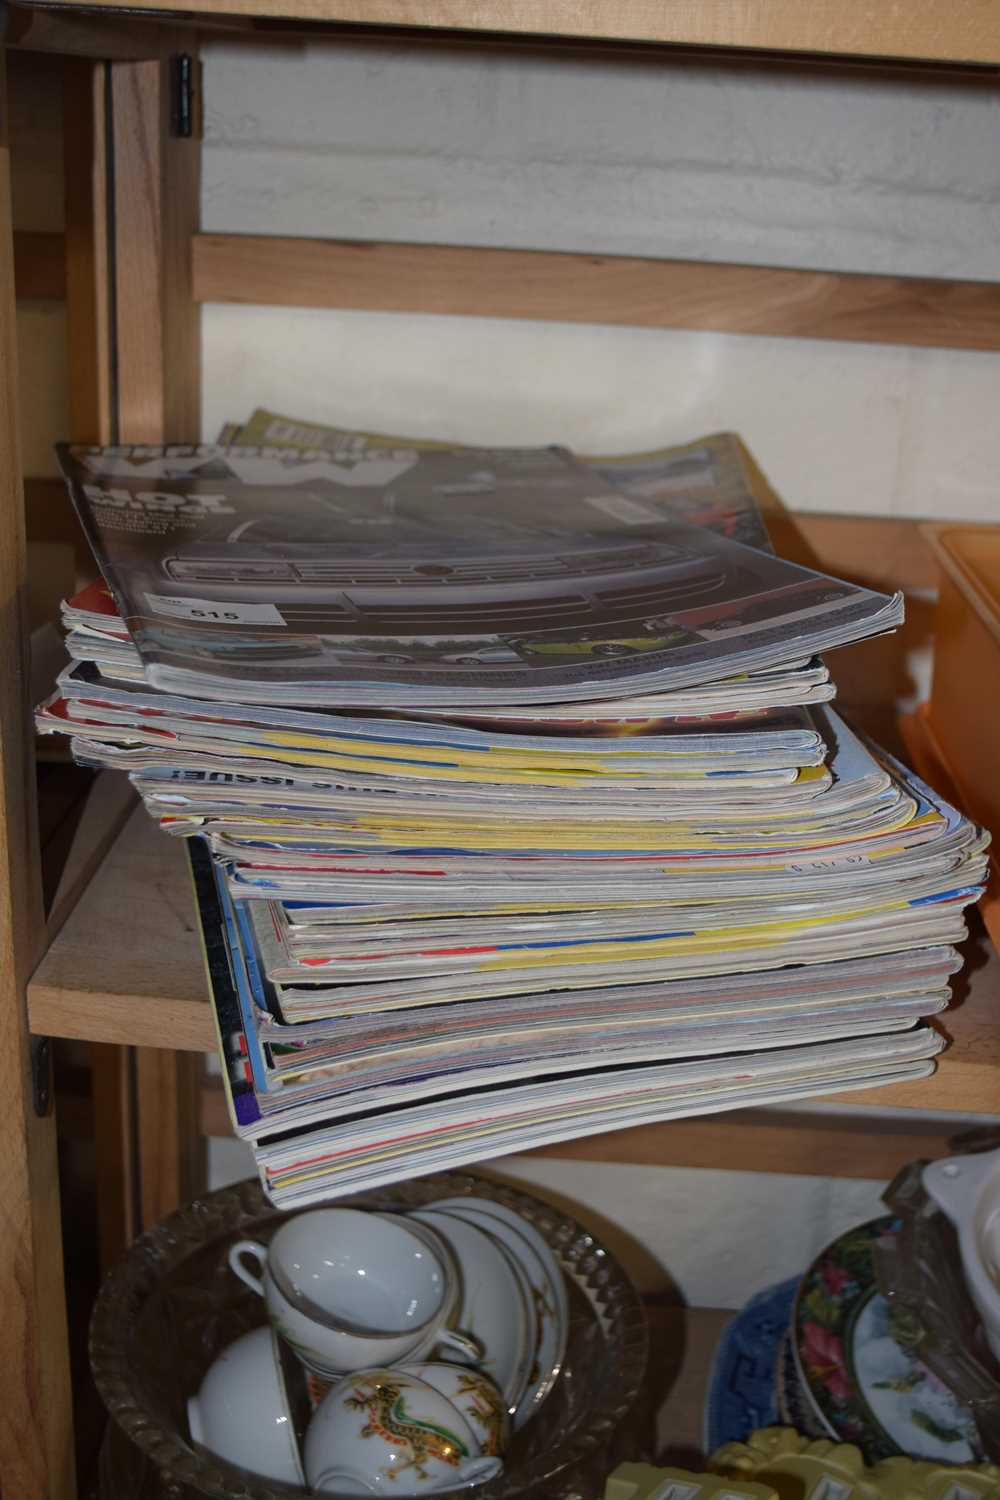 A quantity of various Volkswagon (VW) motoring magazines of various titles